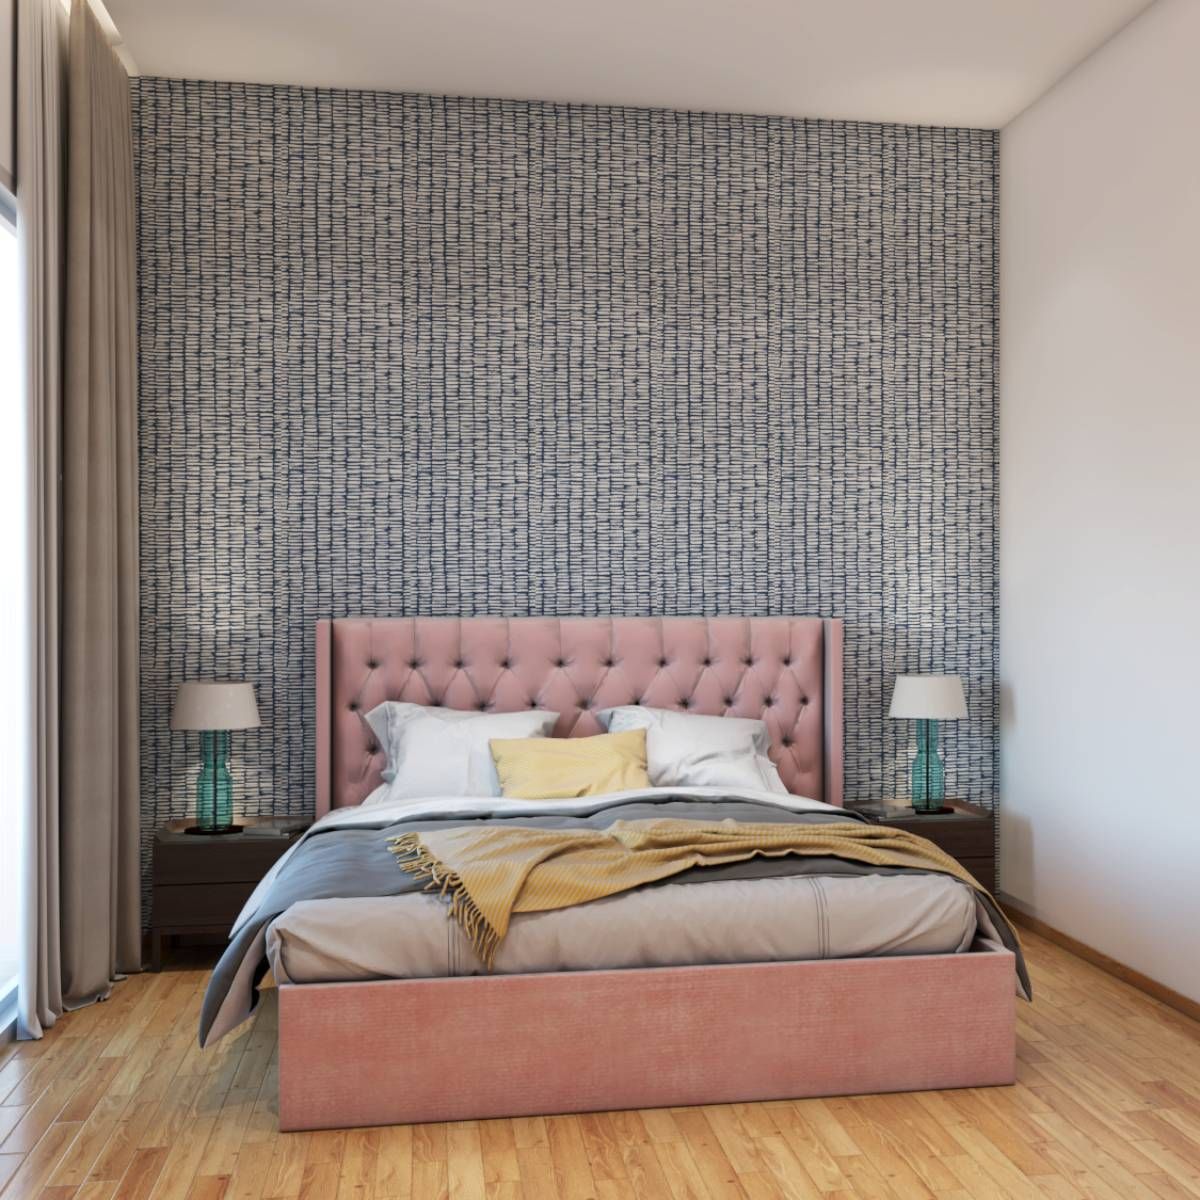 Modern Bedroom Design With A Pink Queen Size Bed And A Fabric Headboard